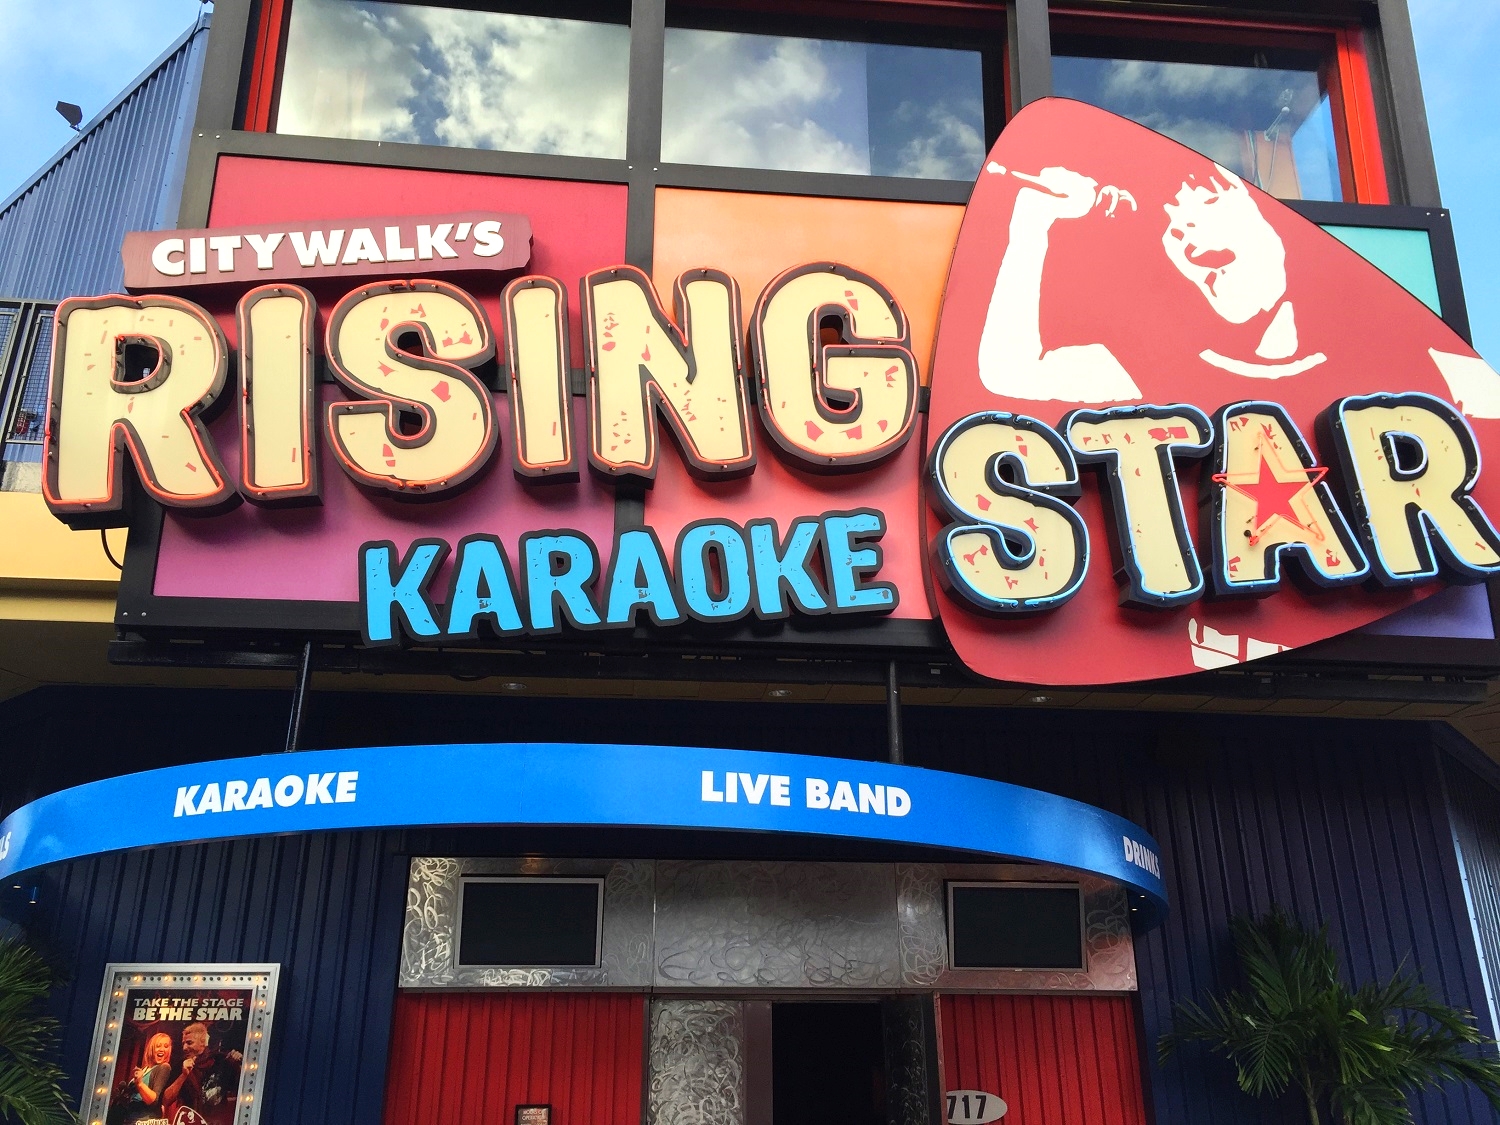 The main stage - Picture of Citywalk's Rising Star, Orlando